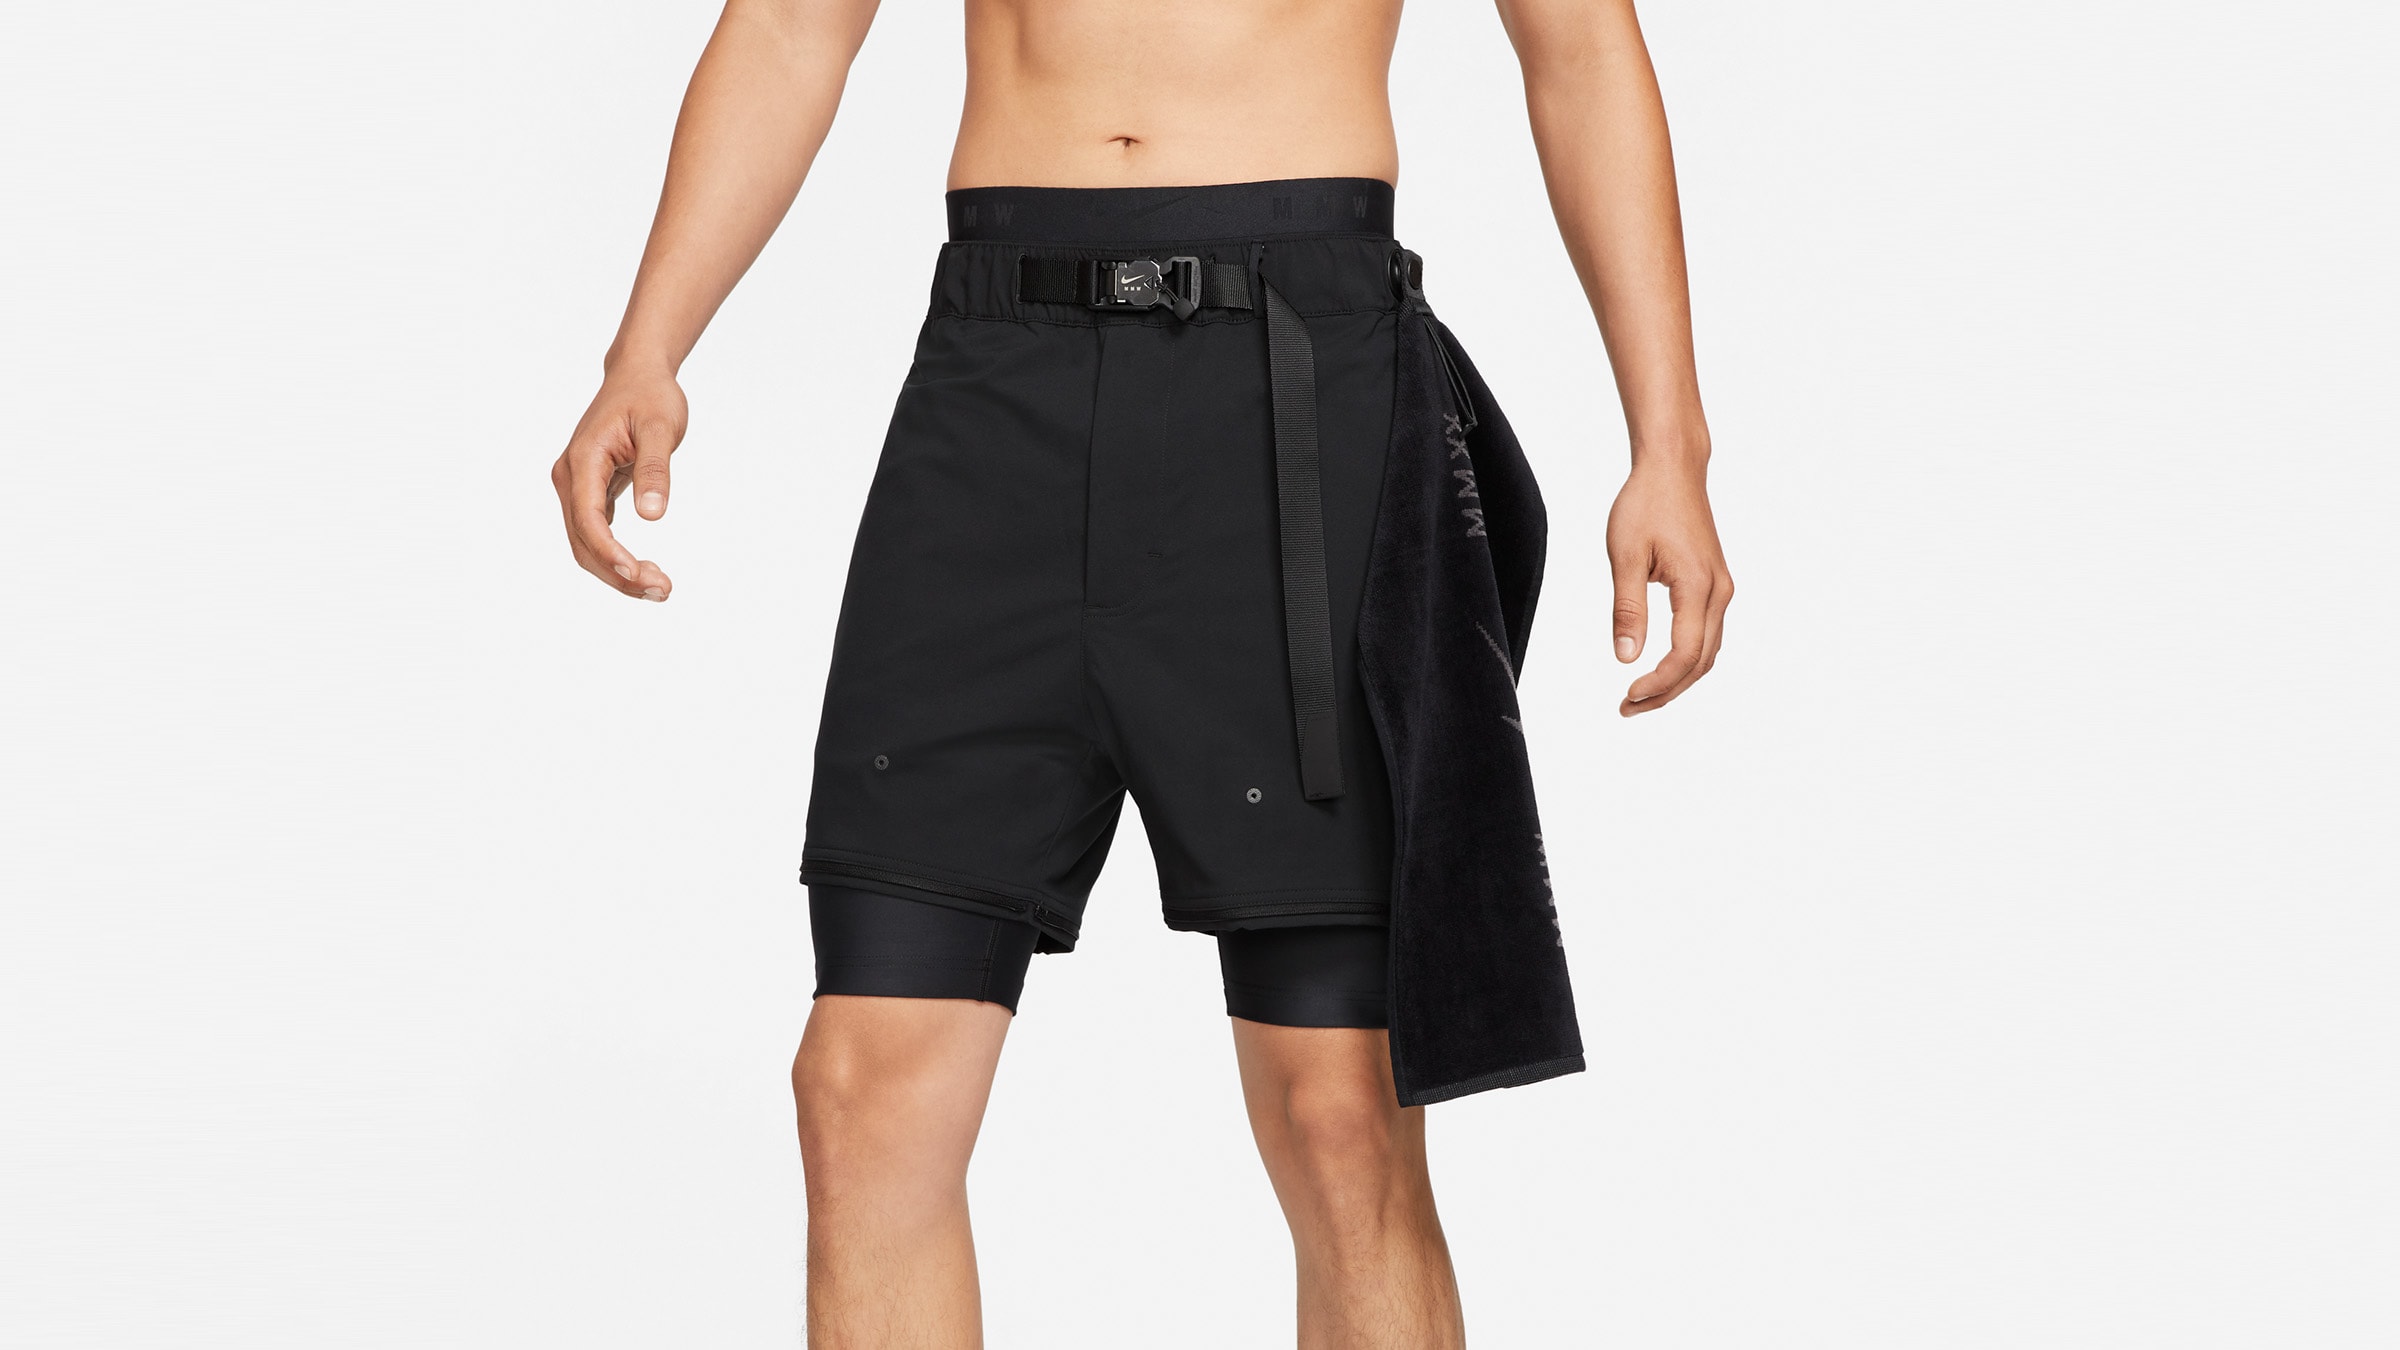 Nike x MMW 3-in-1 Pant (Black) | END. Launches